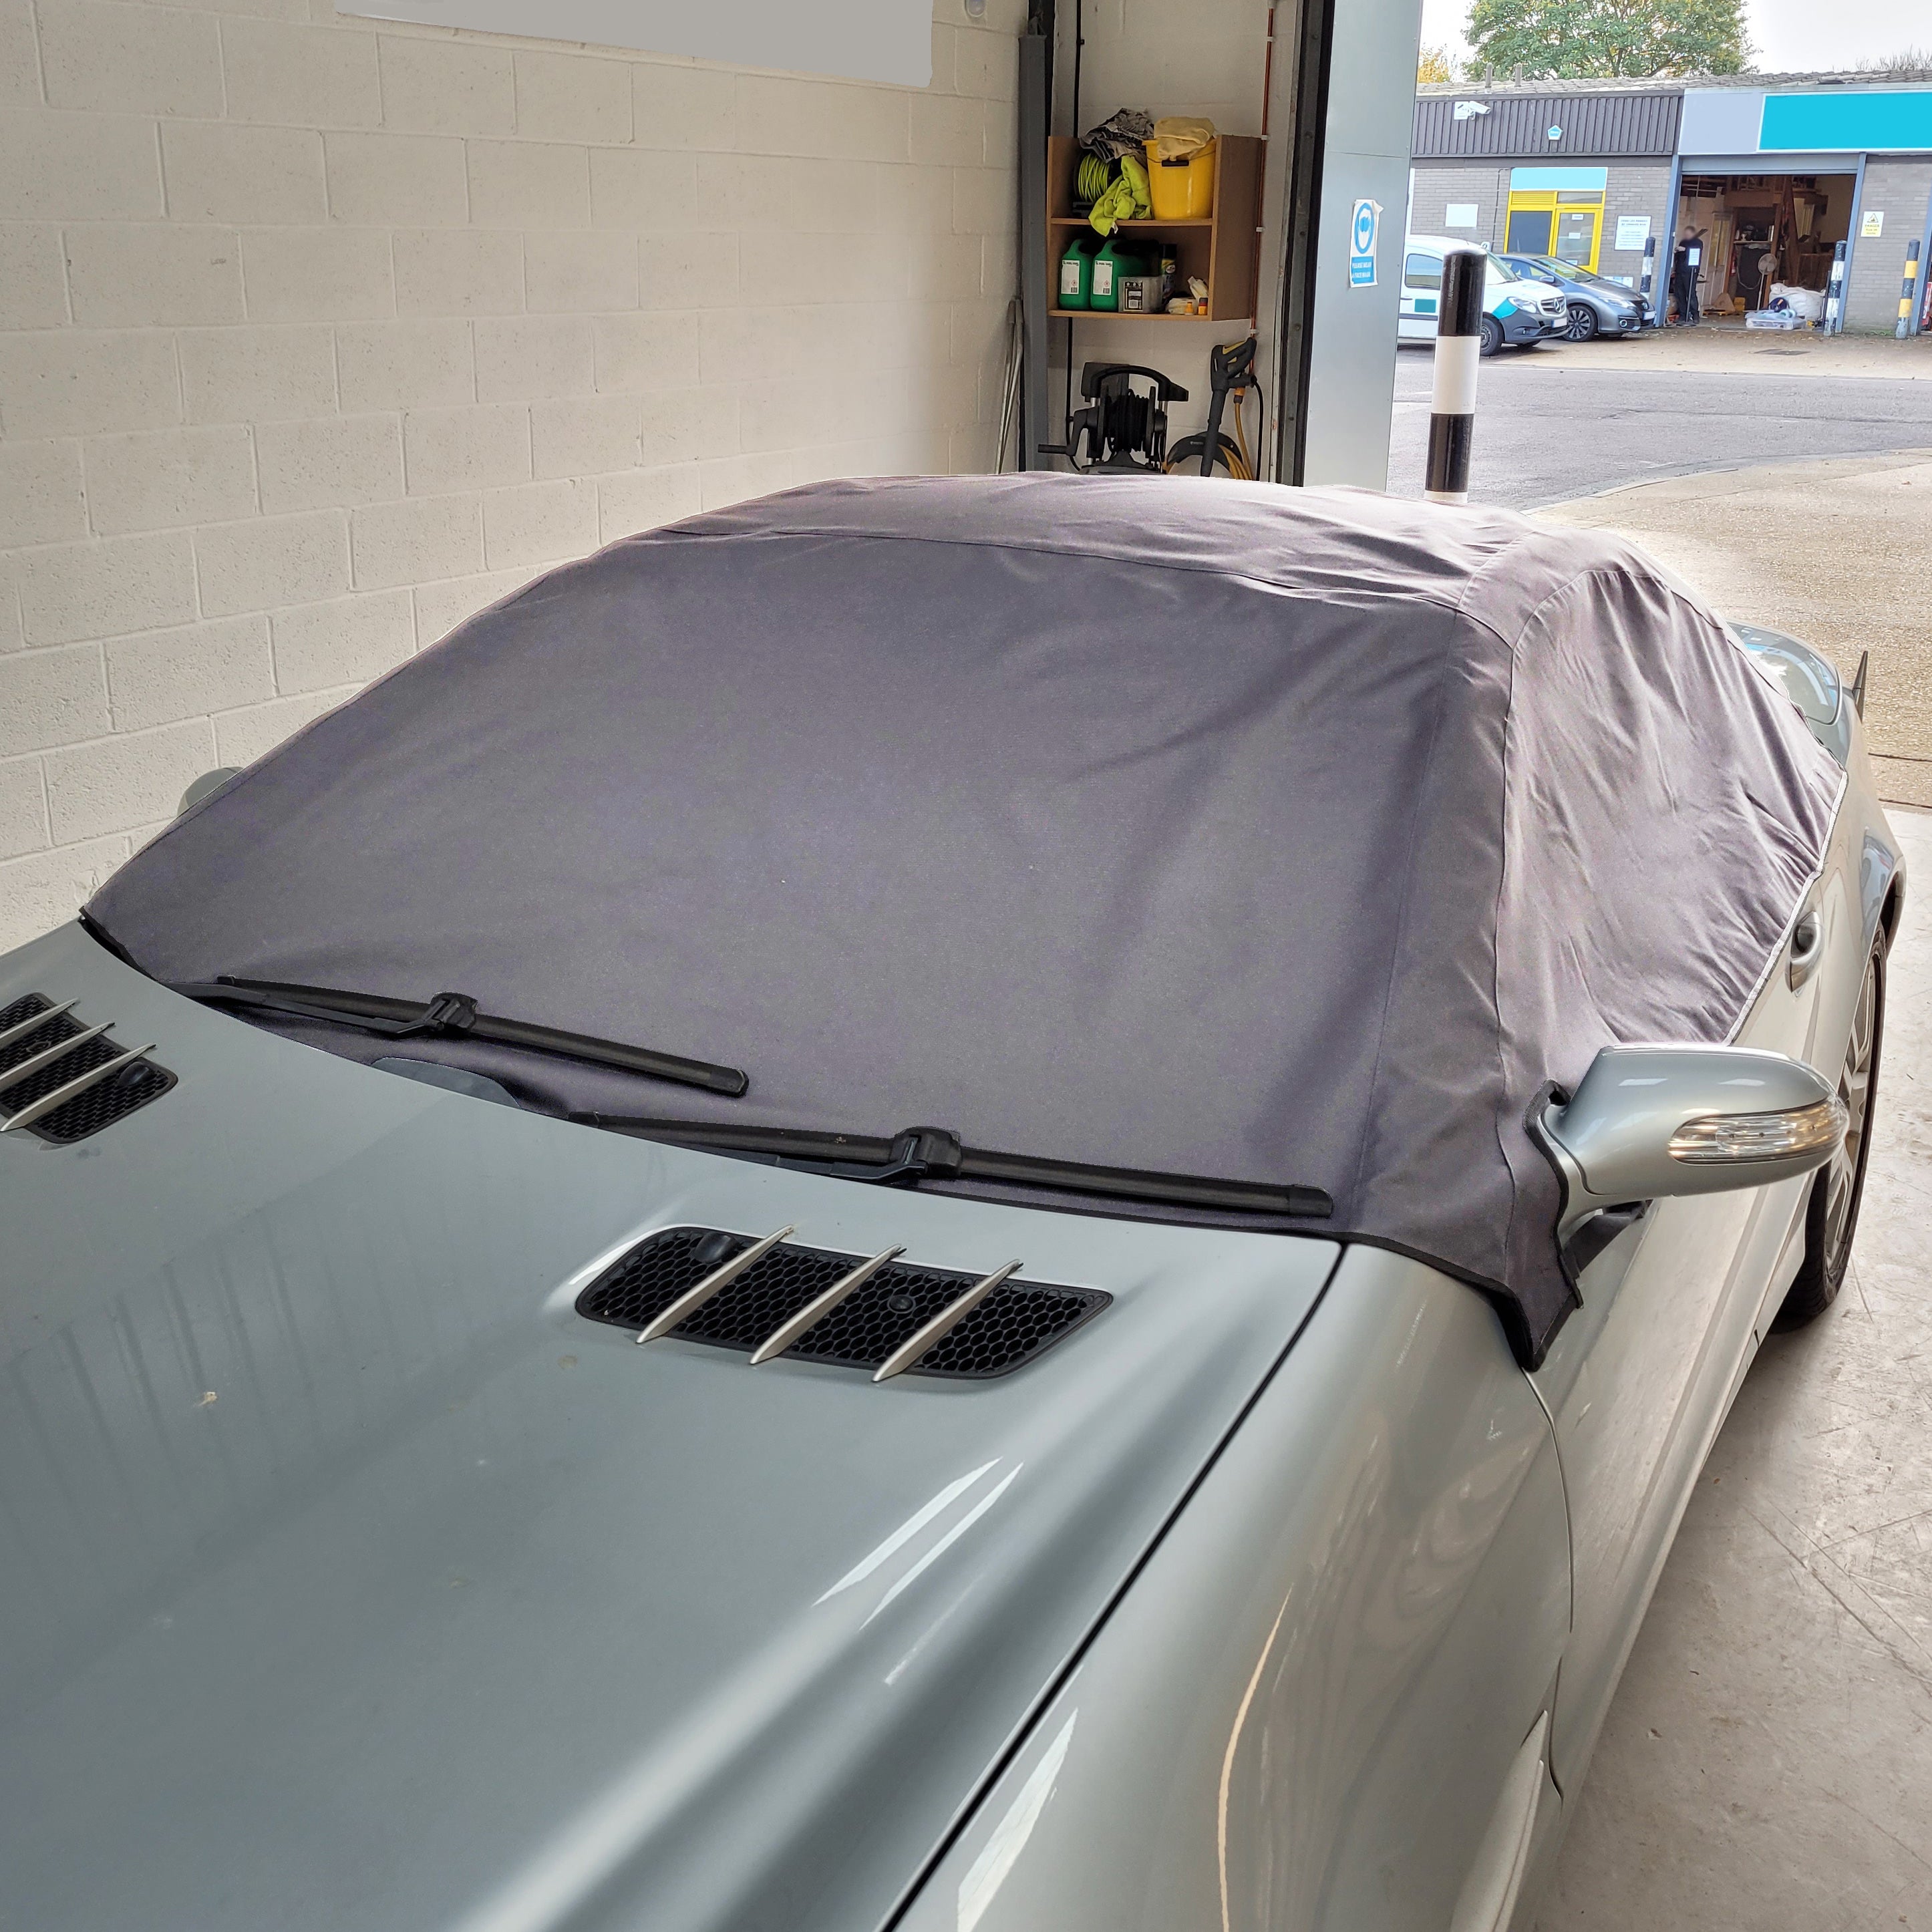 Mercedes SL Class Roof Protector Half Cover | North American